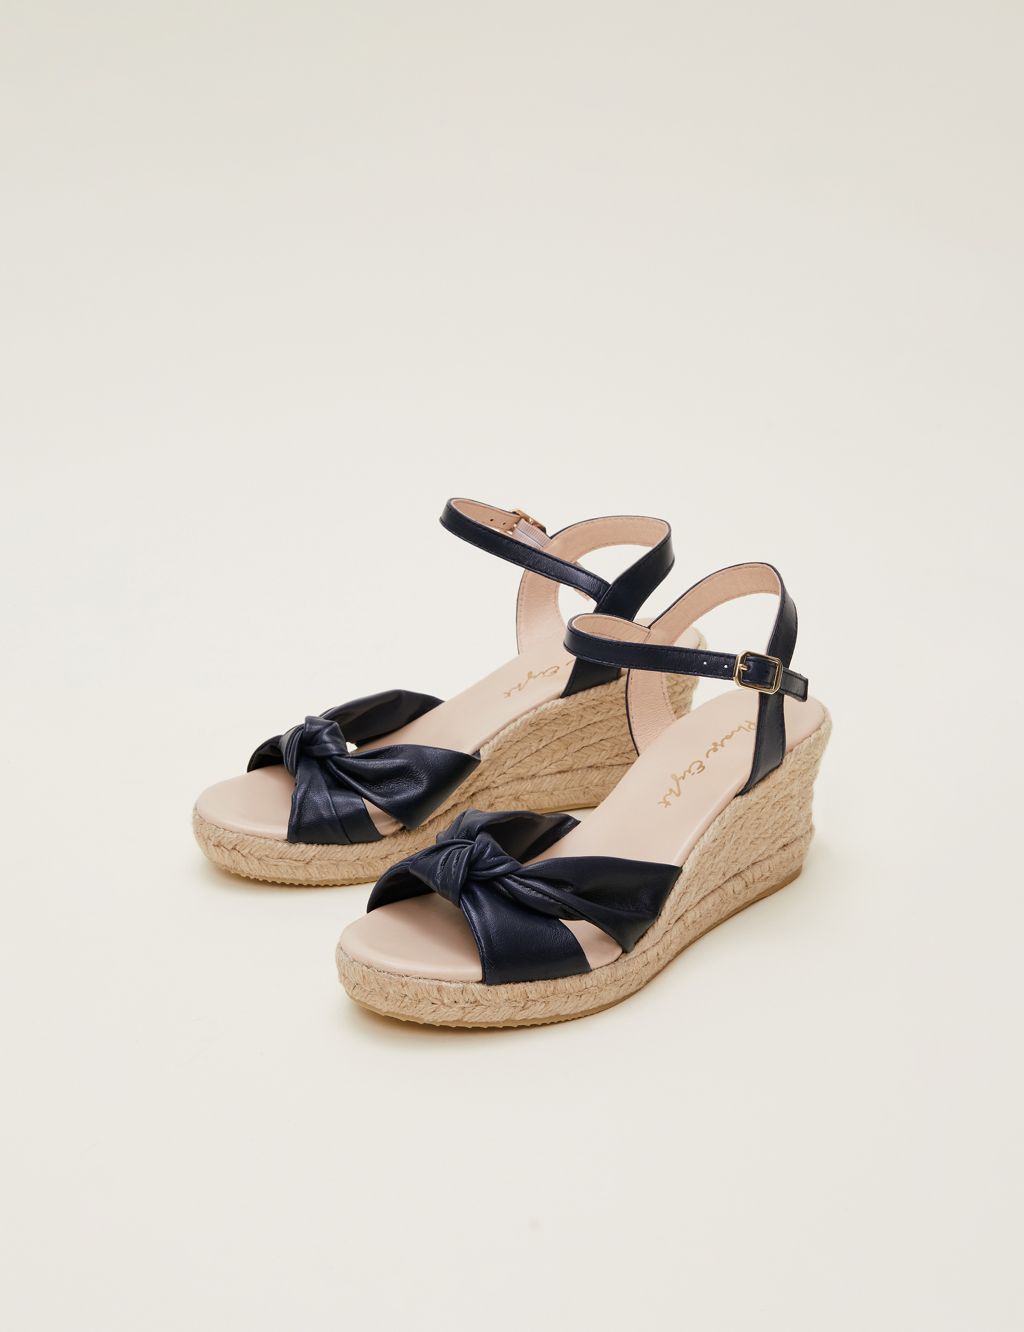 Leather Knot Ankle Strap Wedge Espadrilles image 2